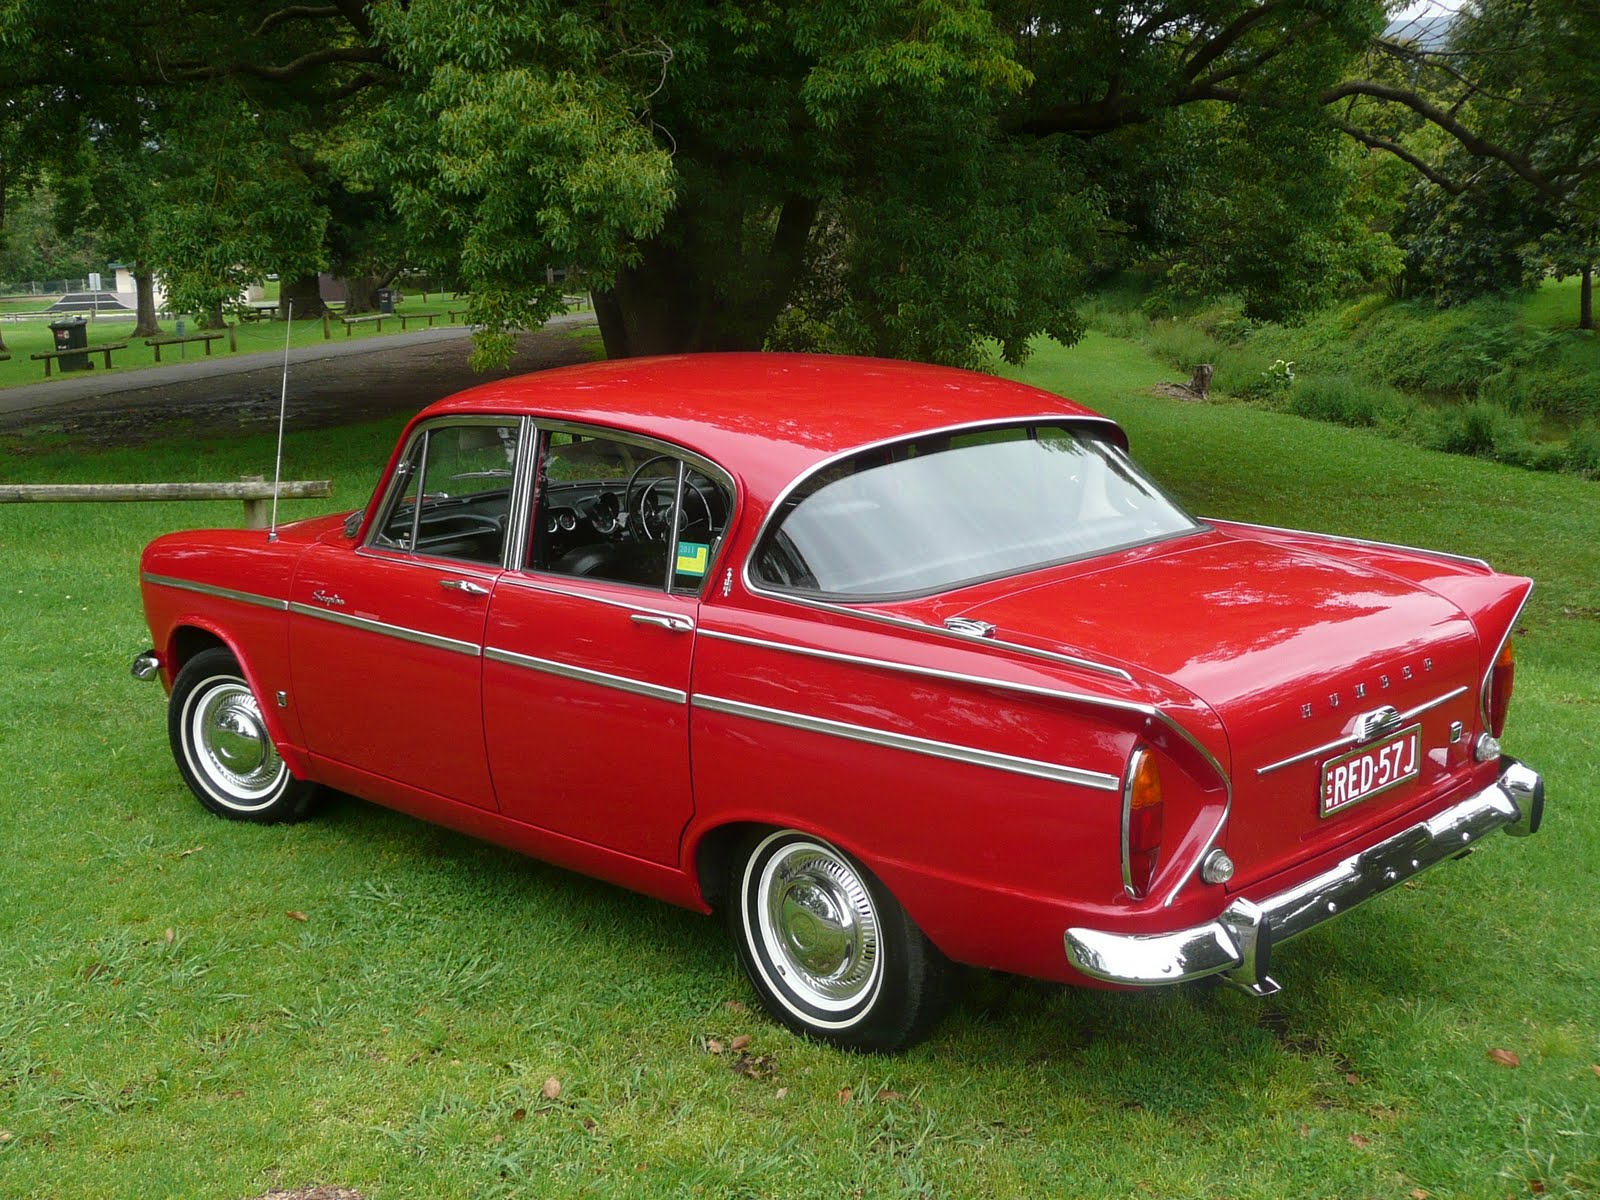 my humber sceptre: Humber Sceptre - Rear View